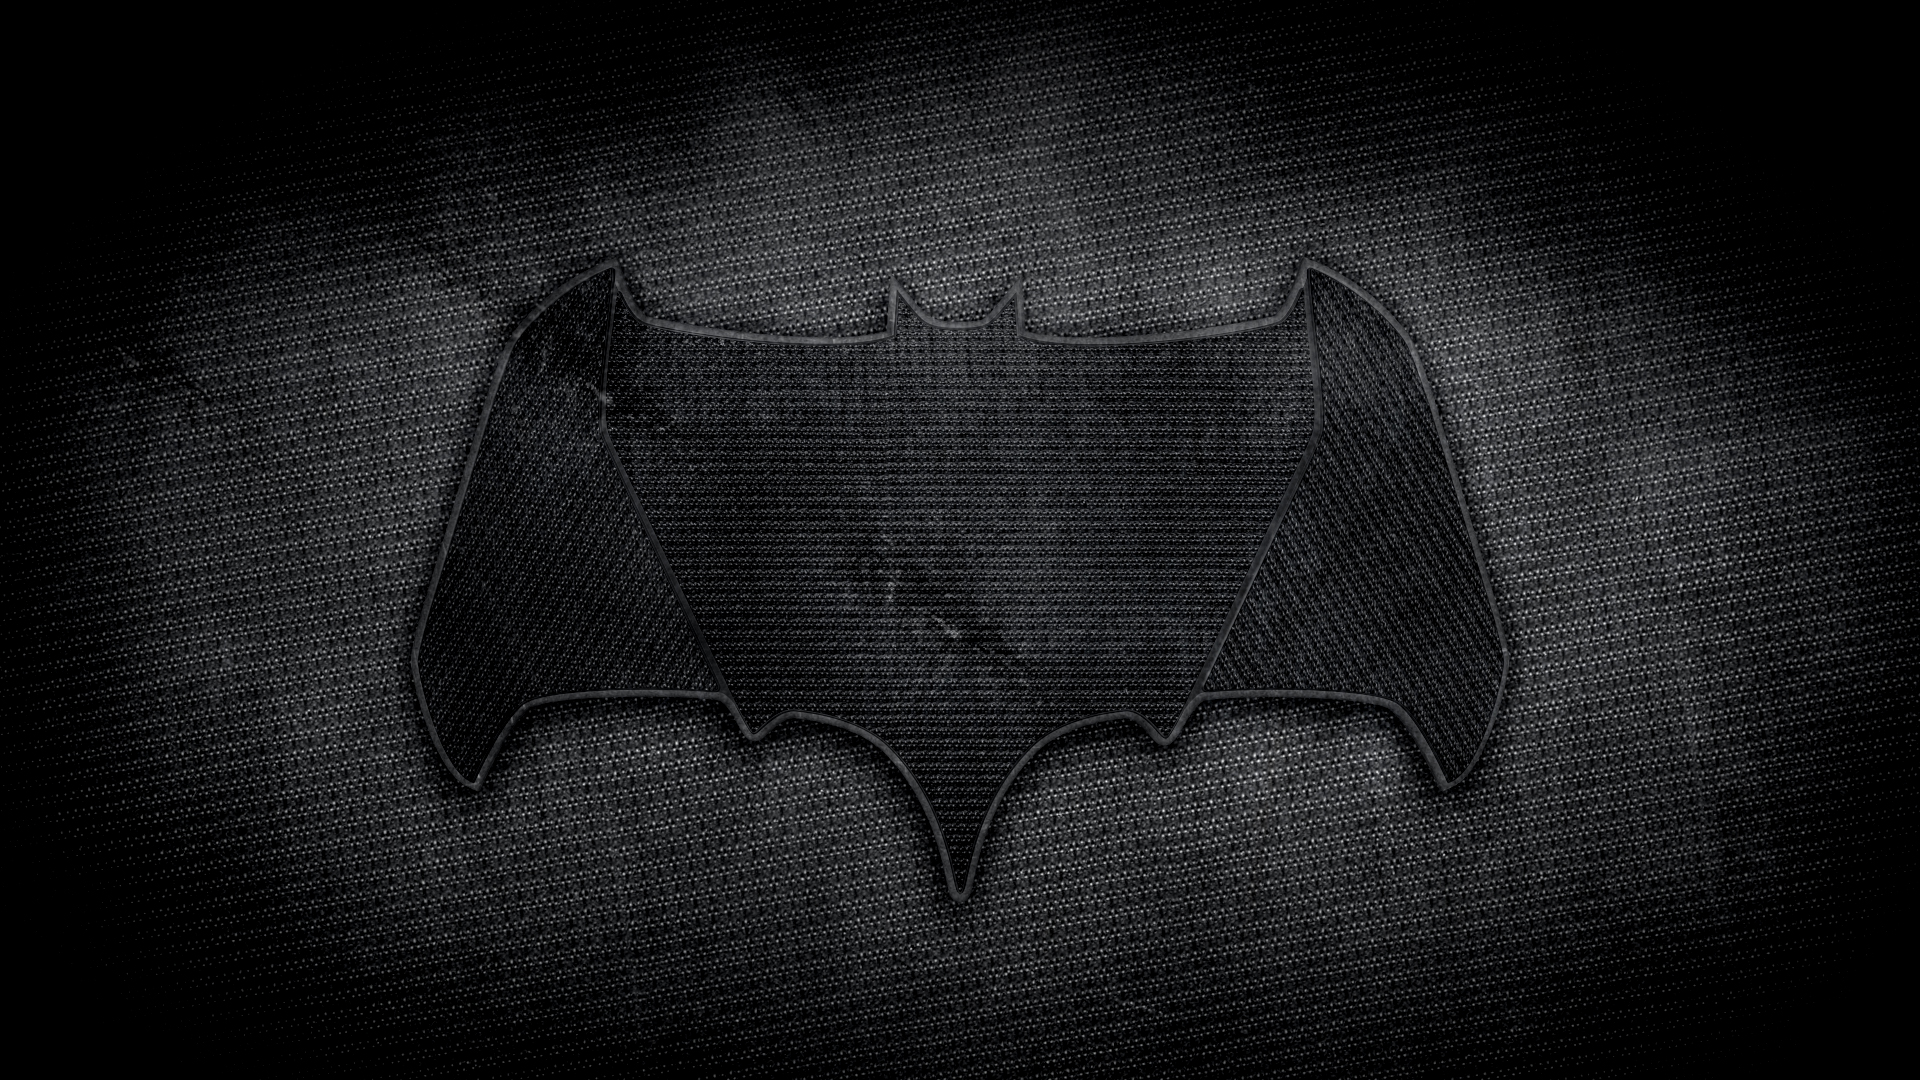 A sketch of what I think the bat symbol will look like based on ...